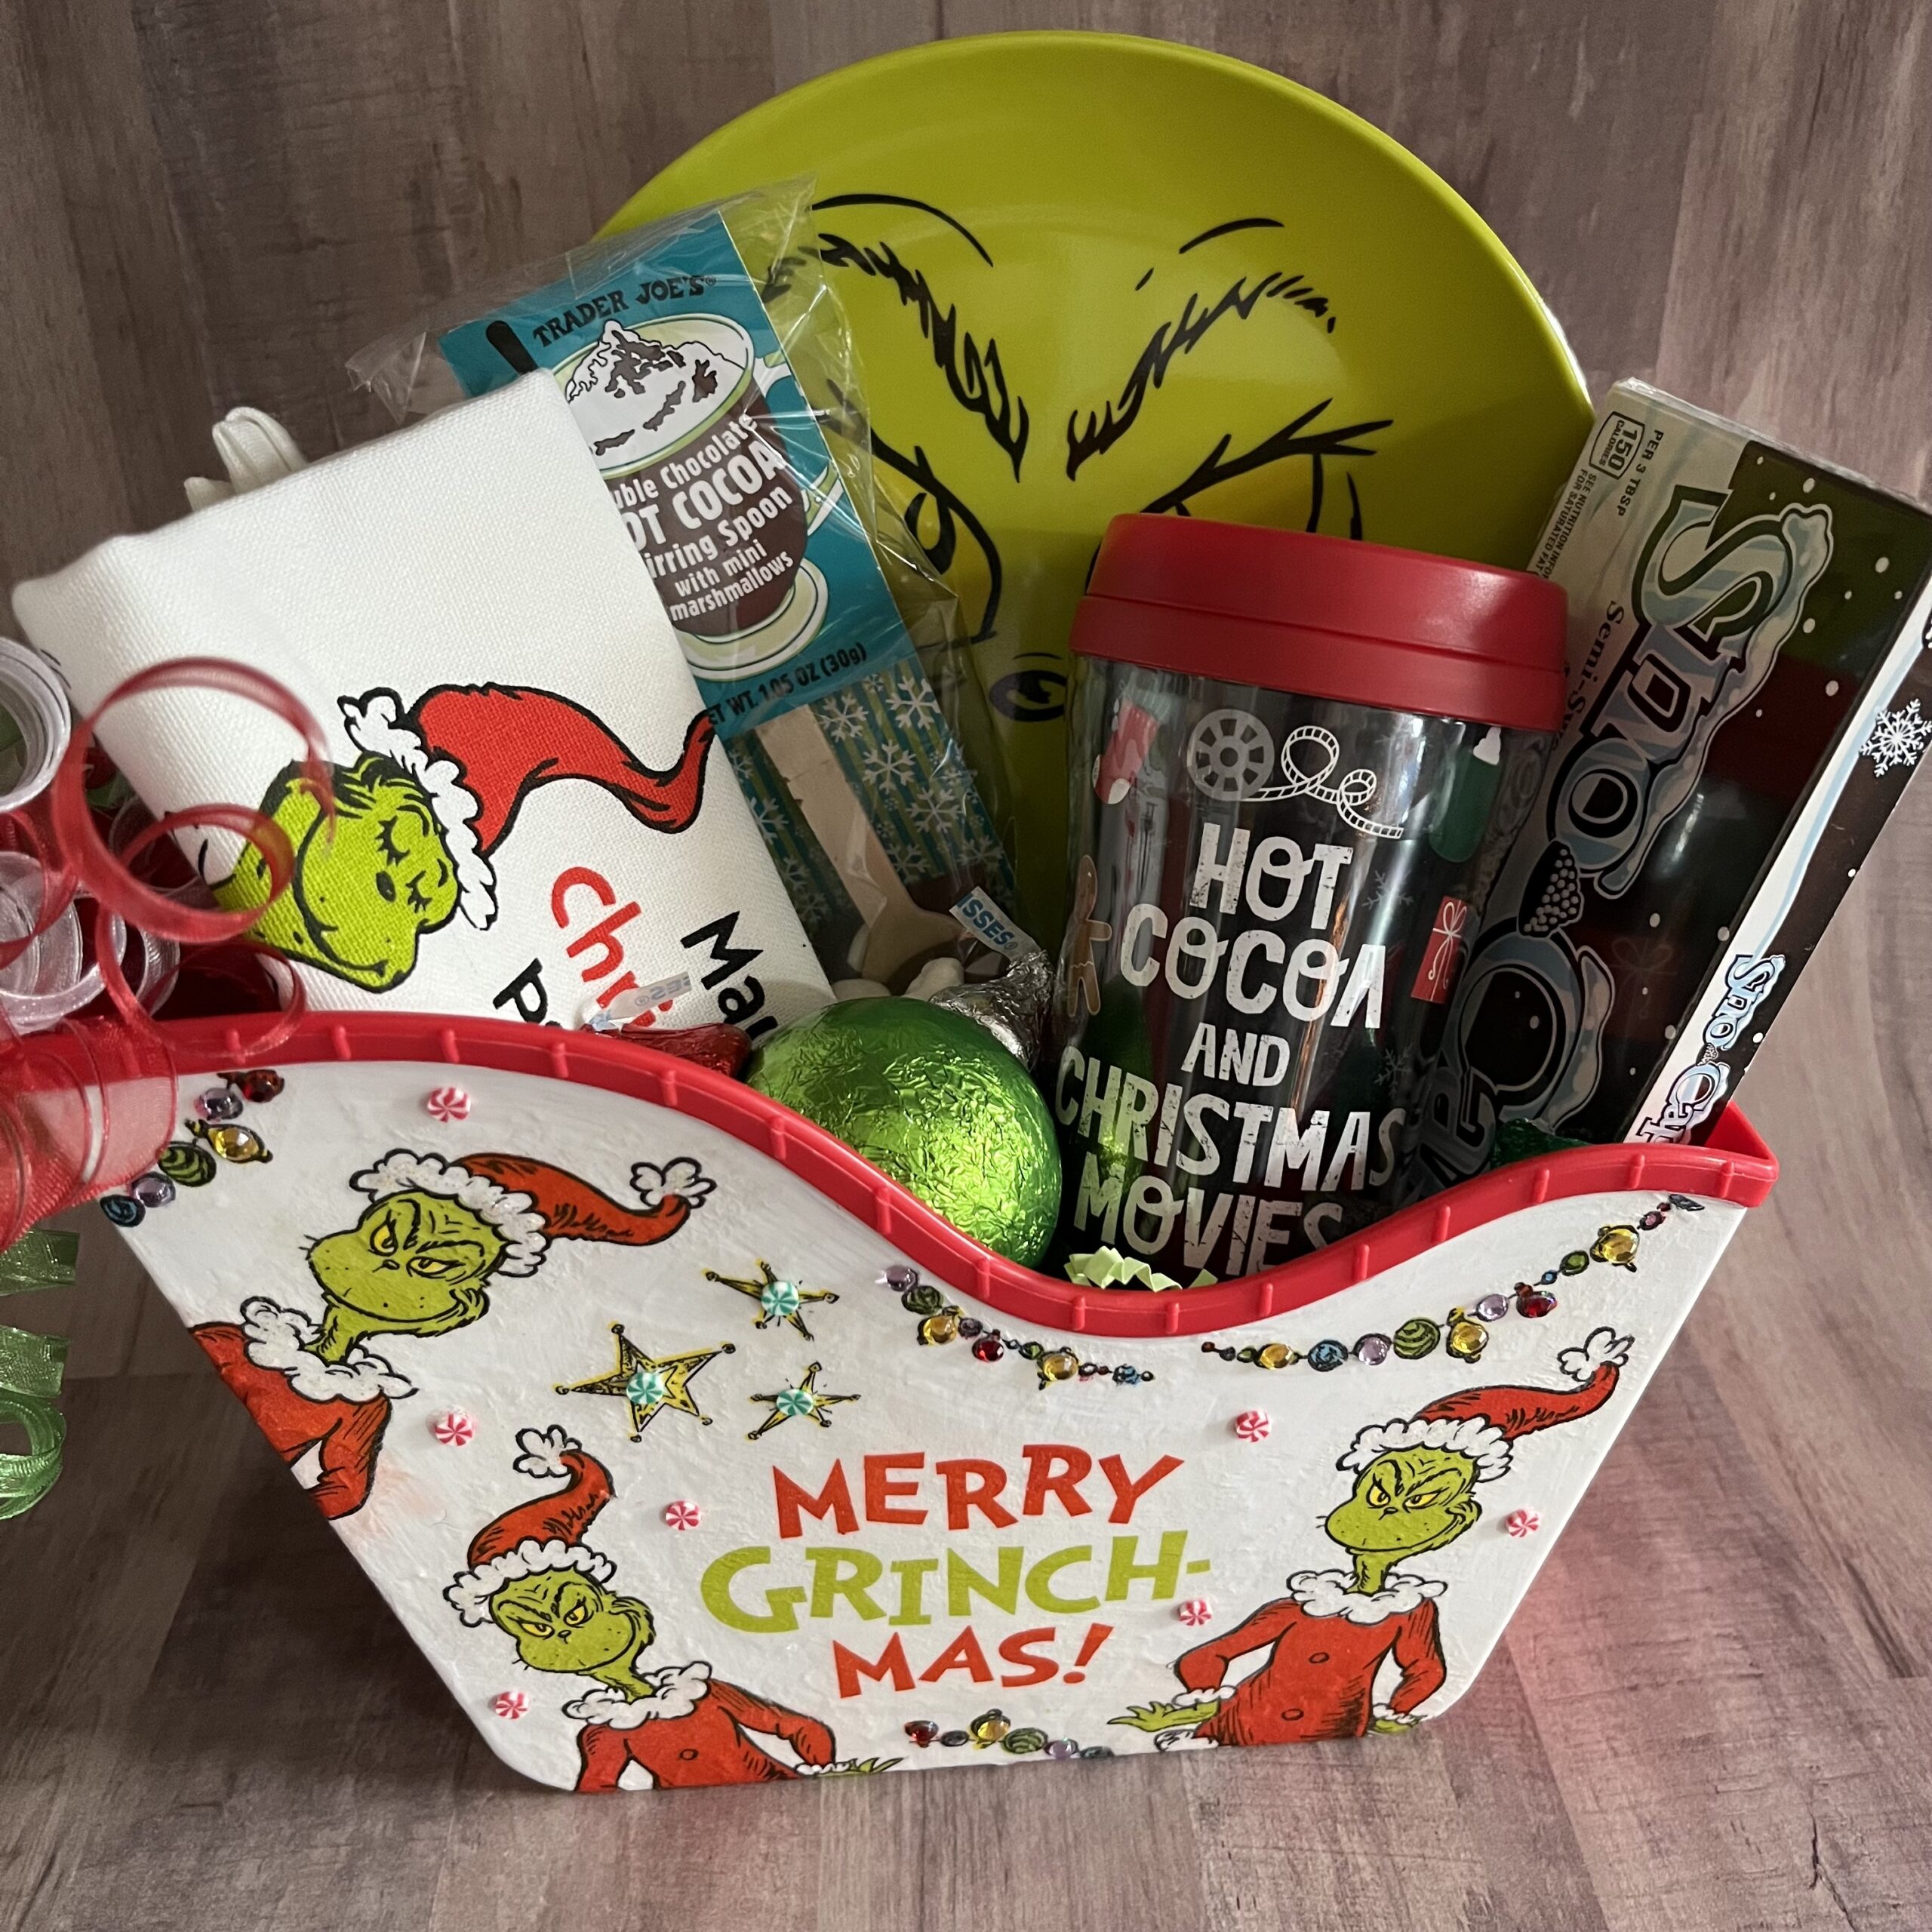 Christmas Baking Themed Gift Basket From The Dollar Tree 